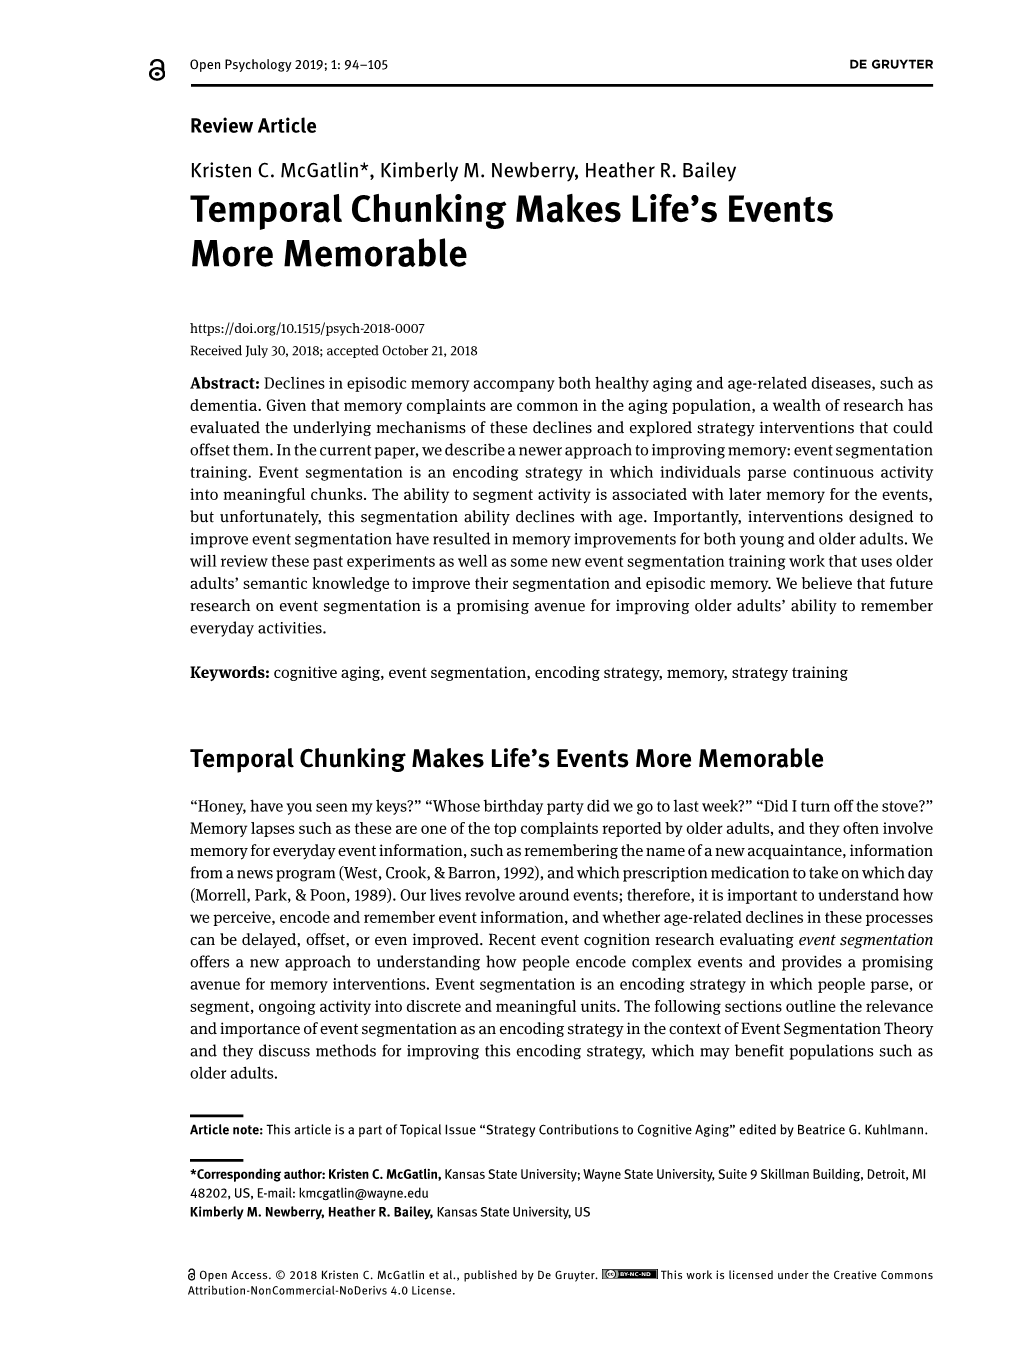 Temporal Chunking Makes Life's Events More Memorable